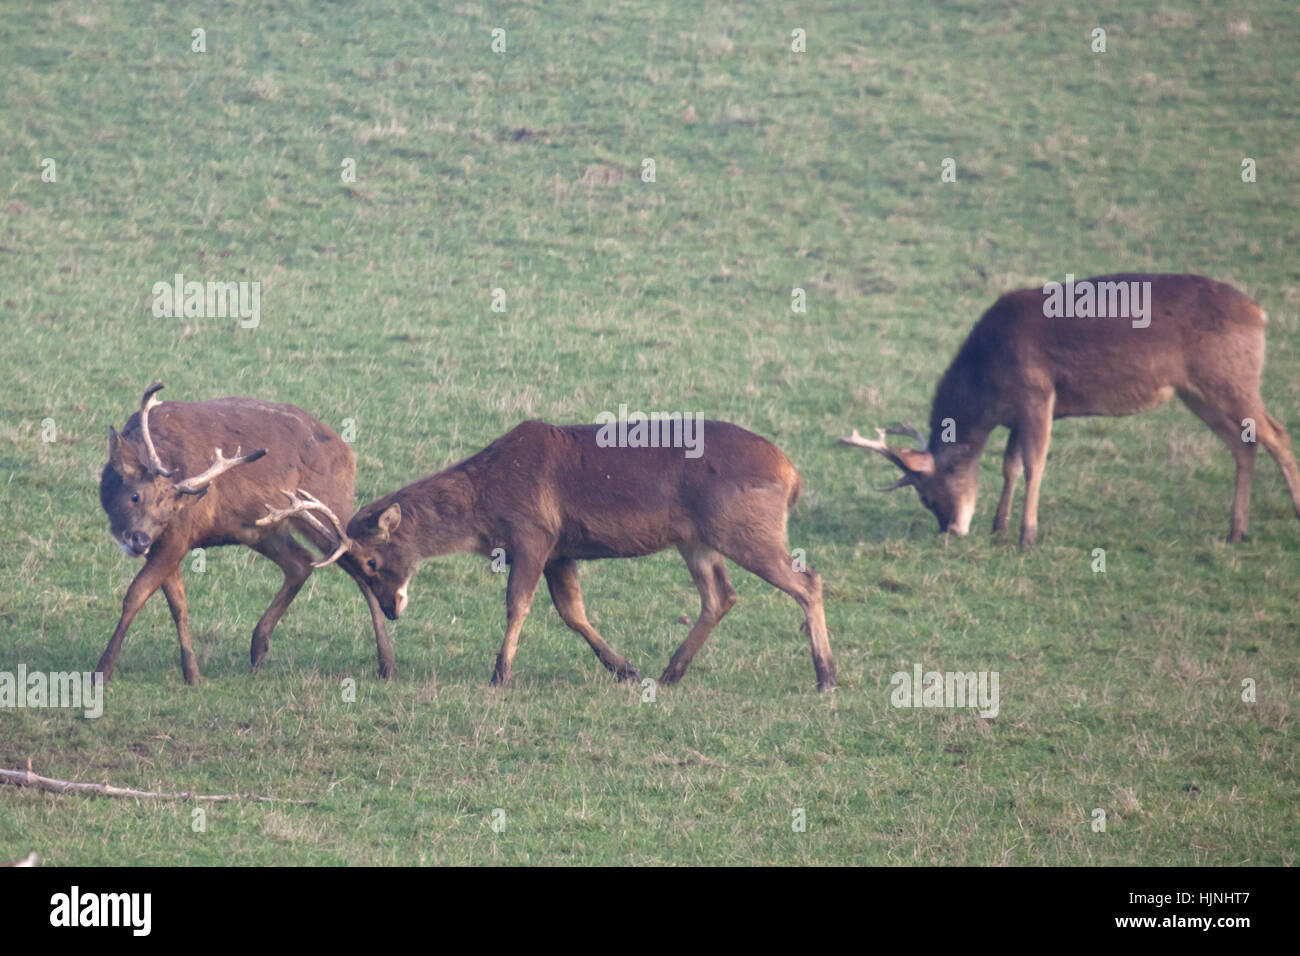 Two rutting Barasingha stags in a field Stock Photo